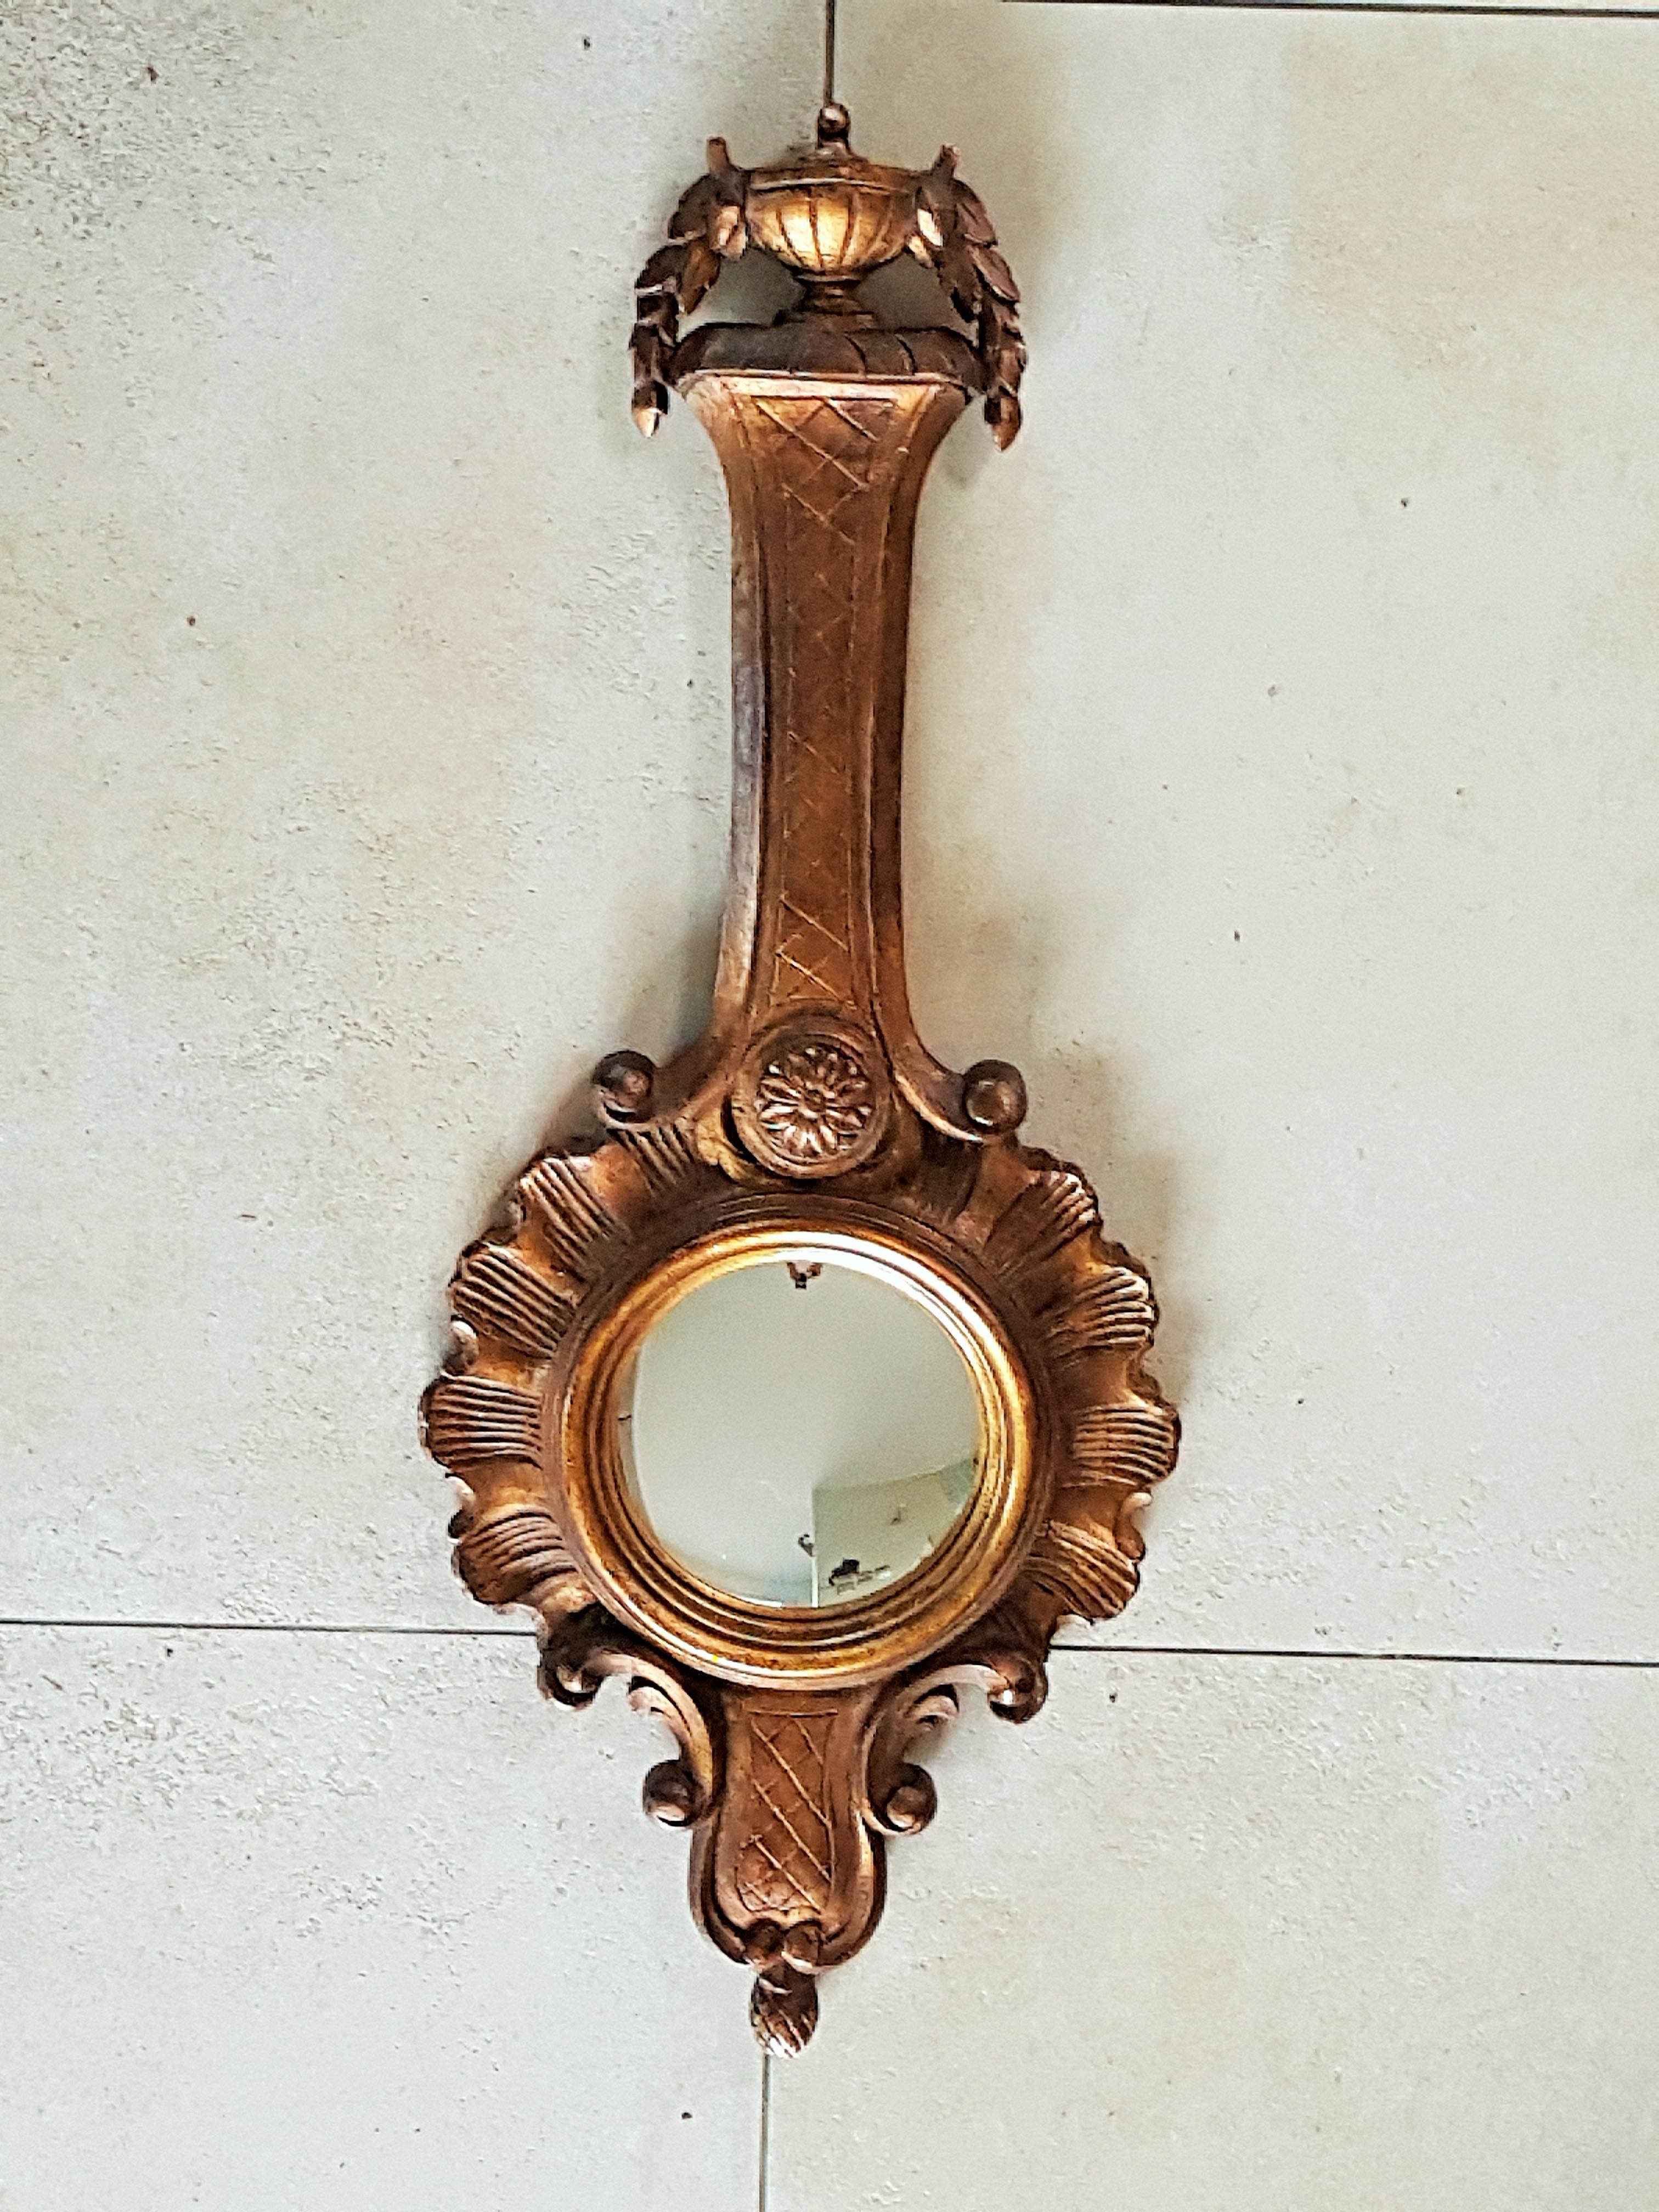 French sunburst Soleil mirror style Louis XV. Convex domed mirror. Gold finish.

